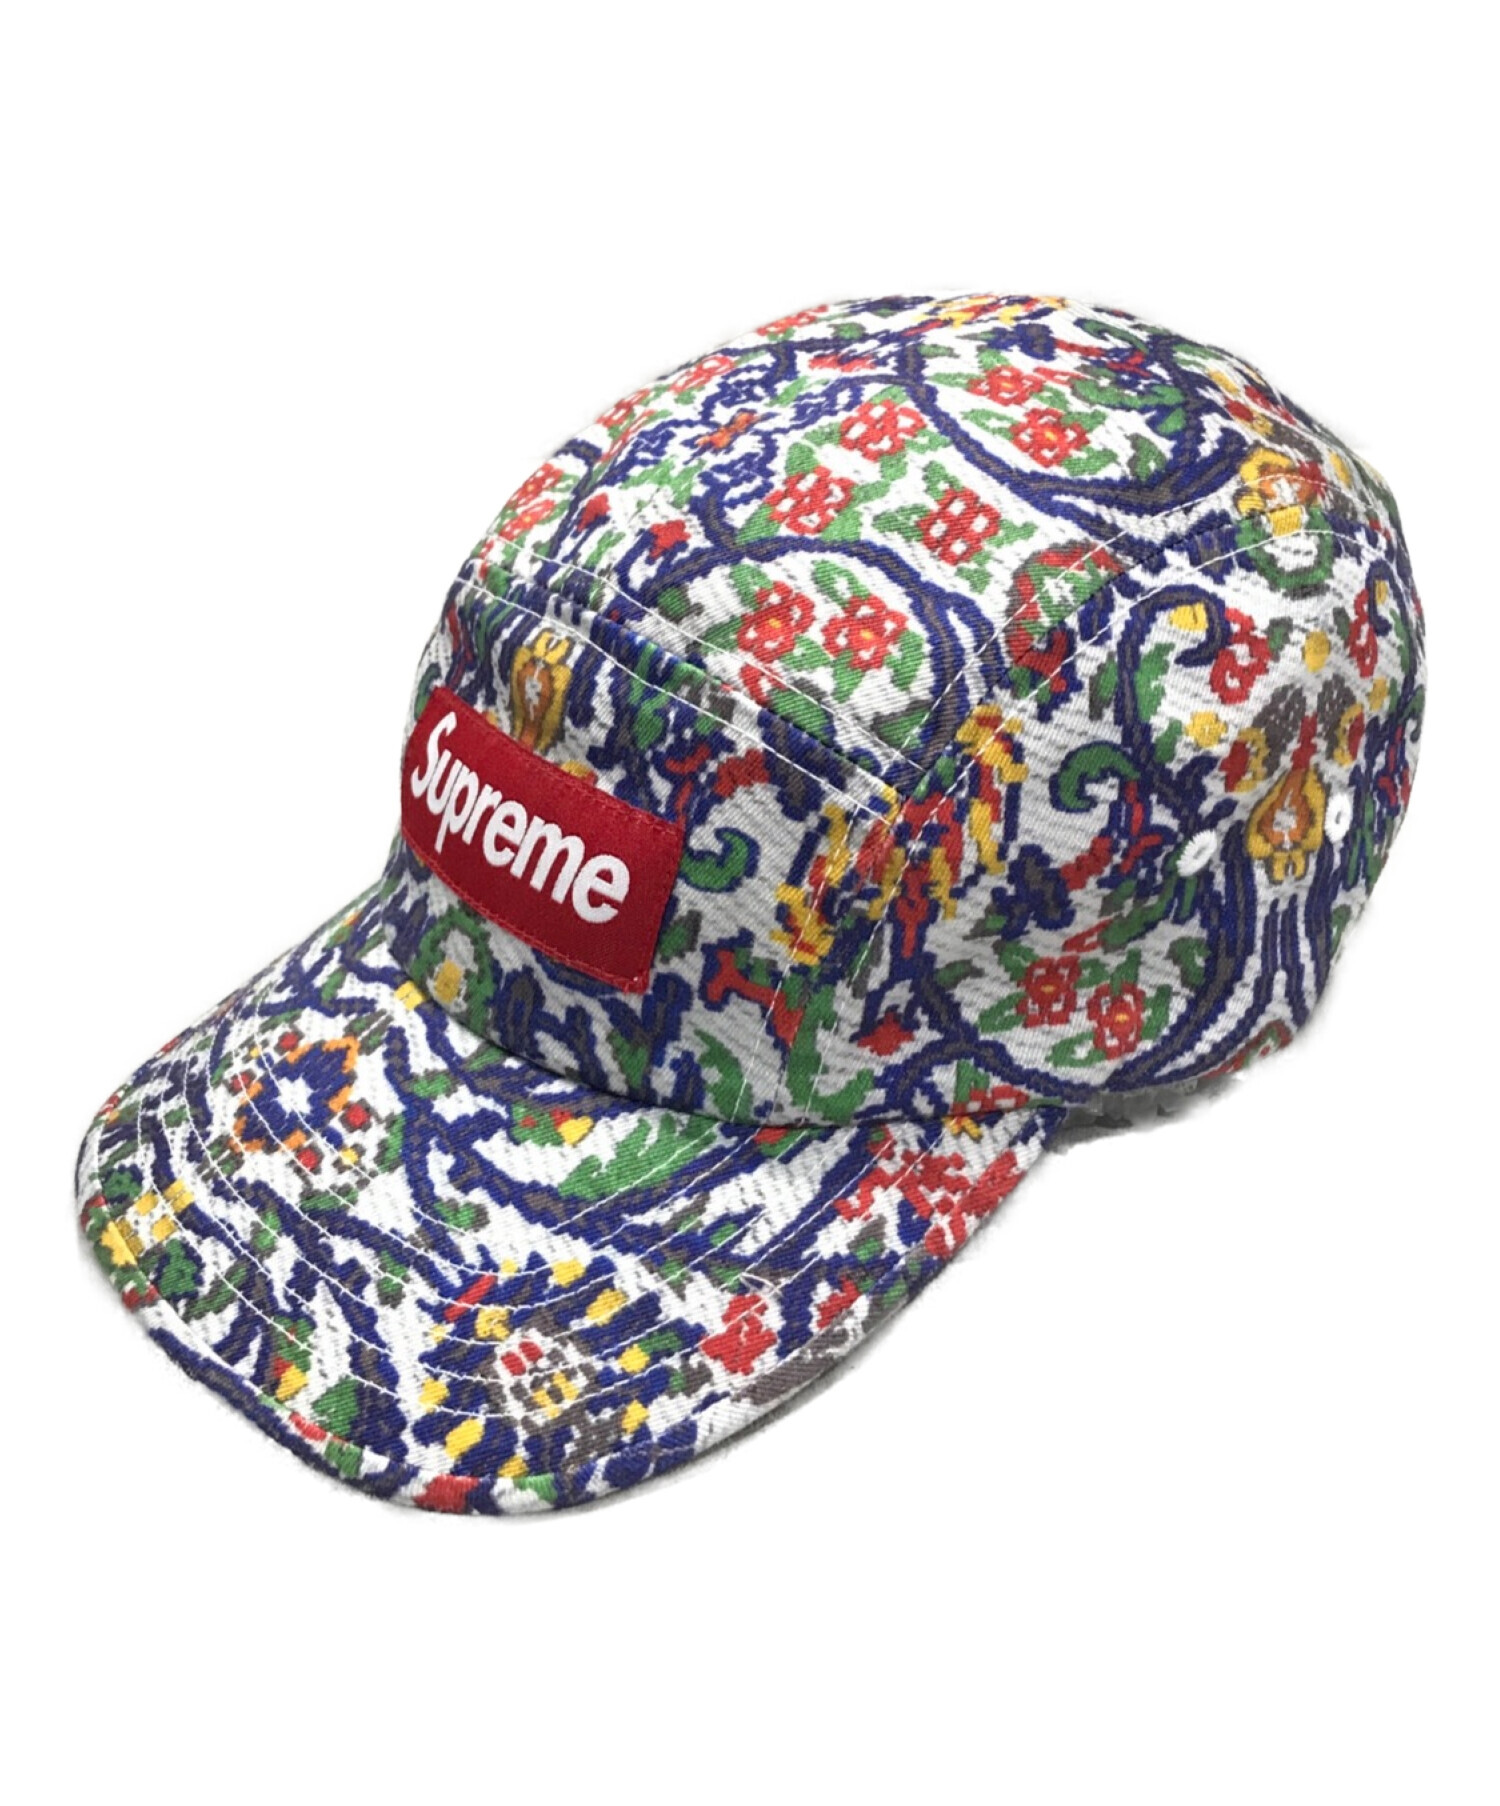 Supreme Washed Chino Twill Camp Cap 23ss